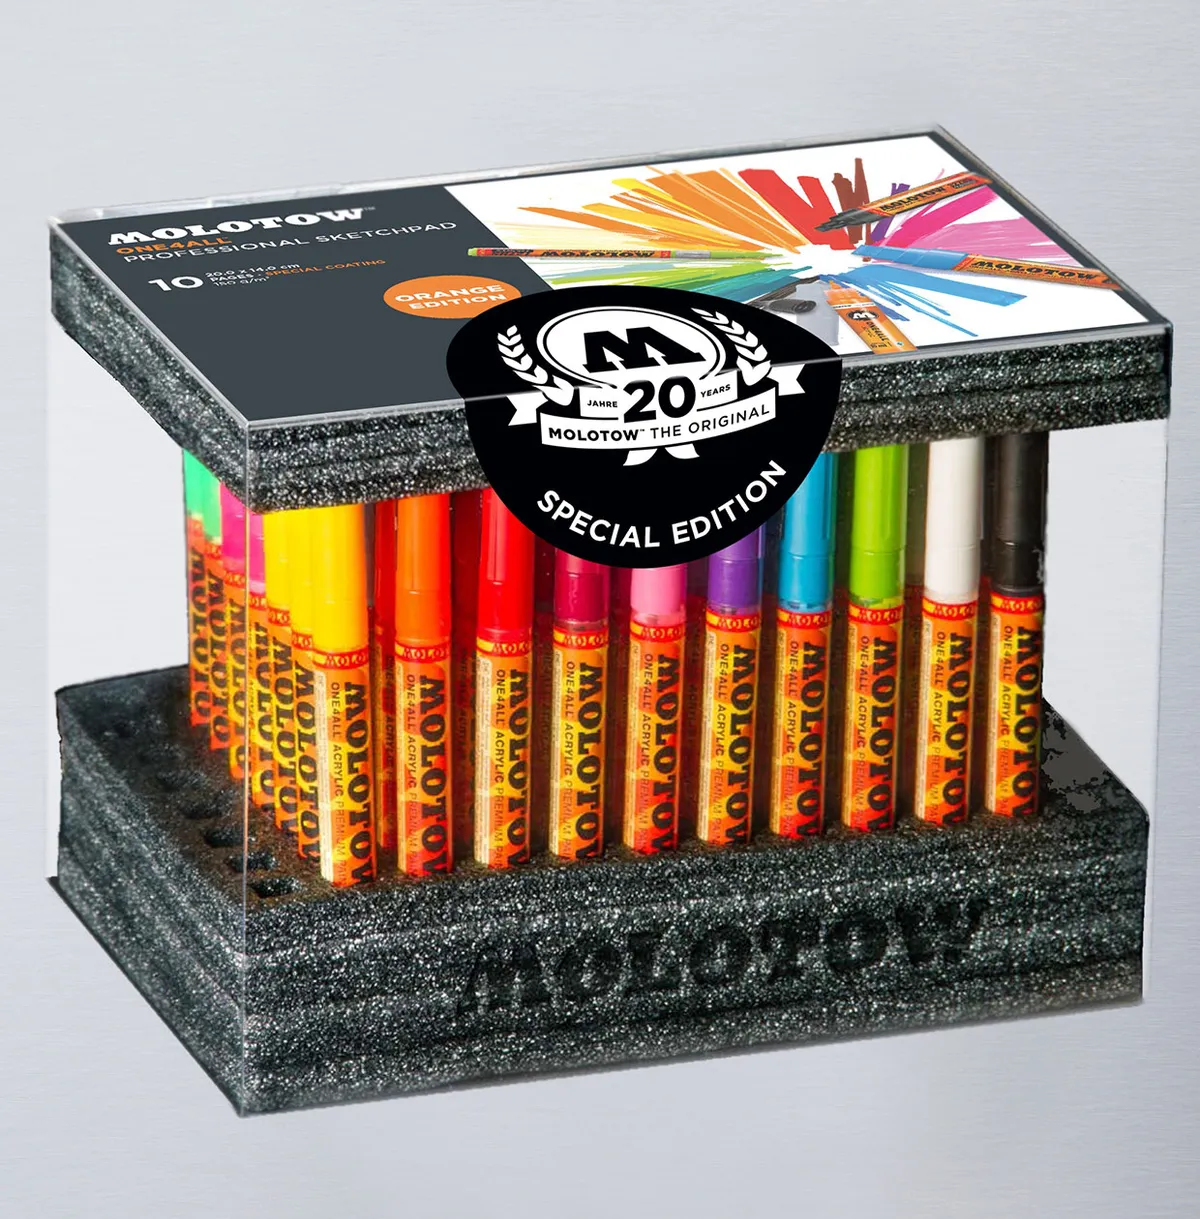 How to use paint markers – Molotow set of 70